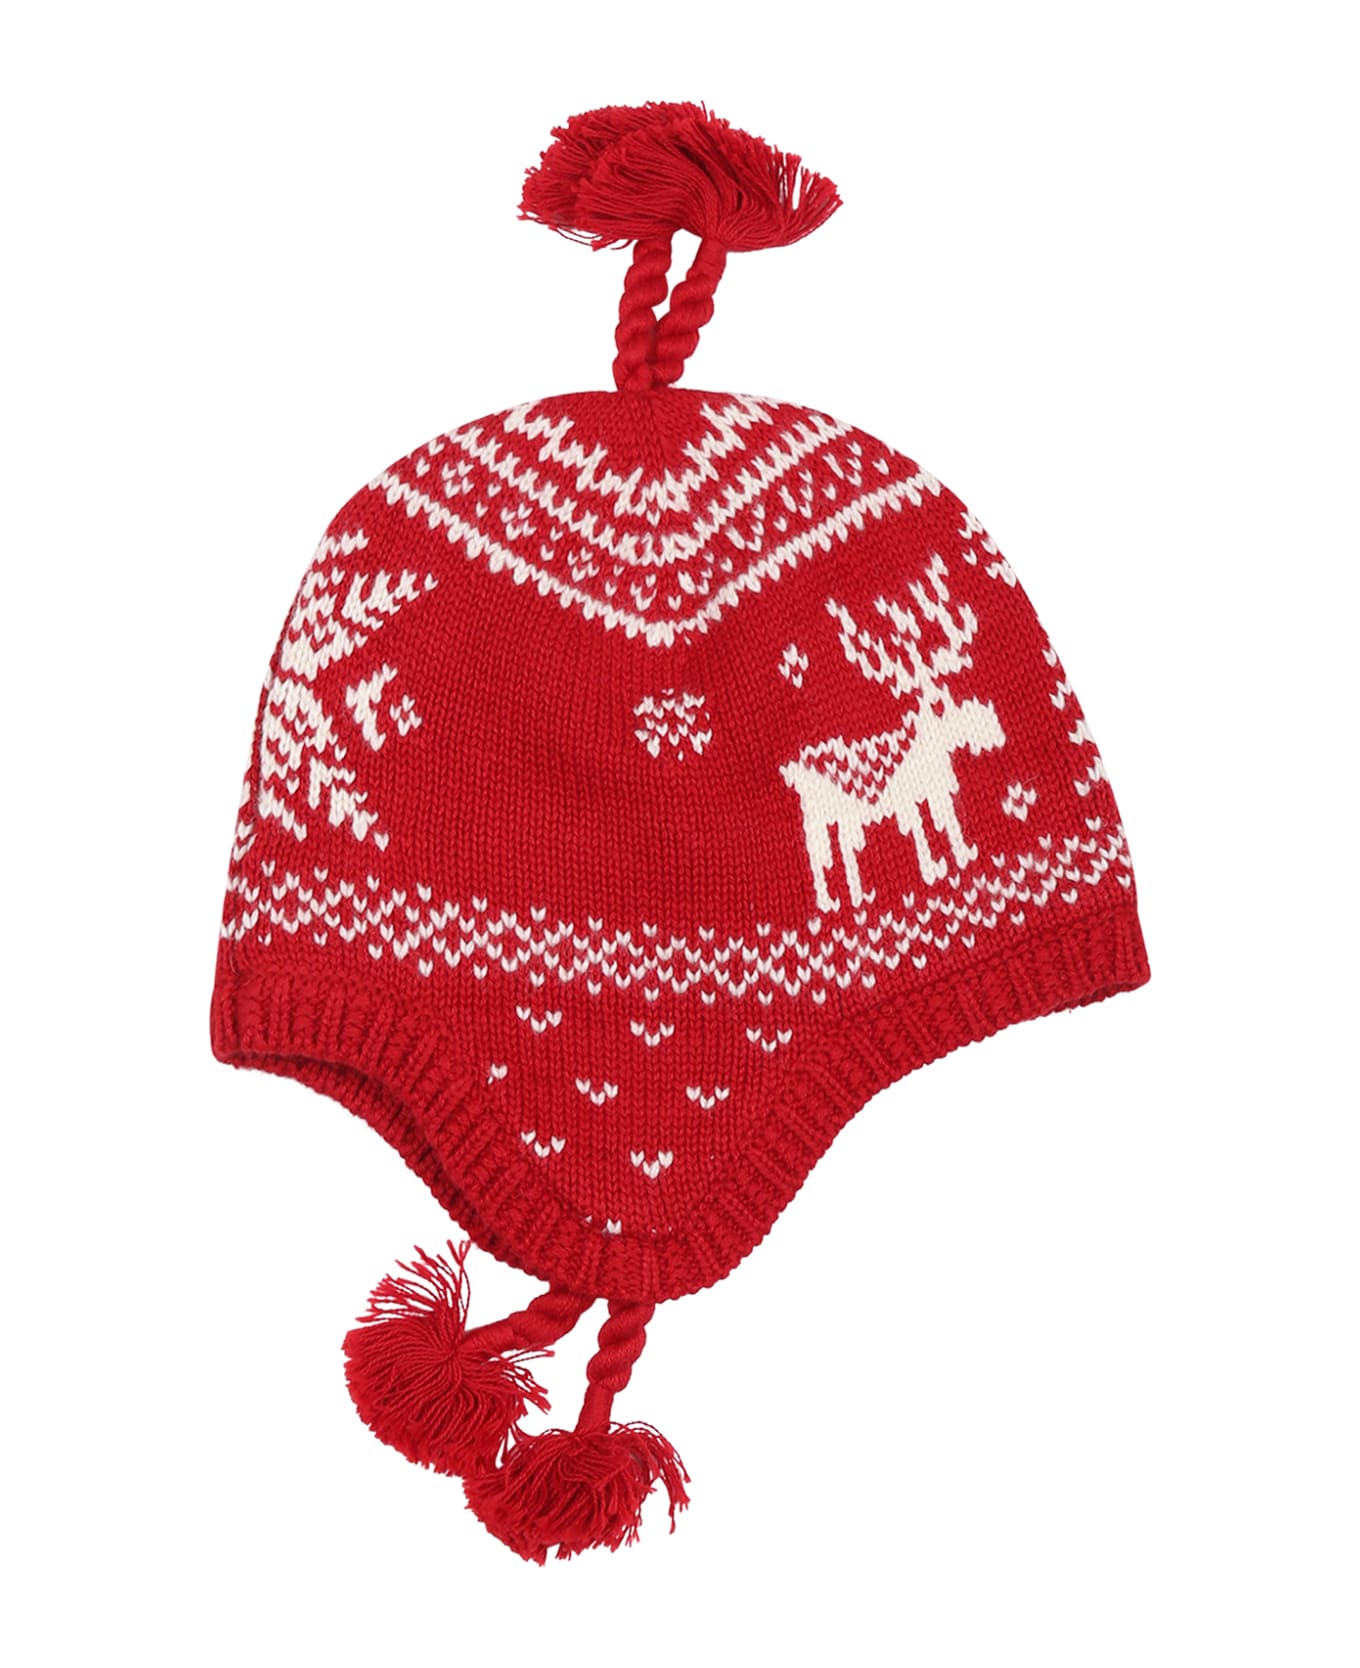 Ralph Lauren Red Hat For Baby Girl With Jacquard Pattern - Red